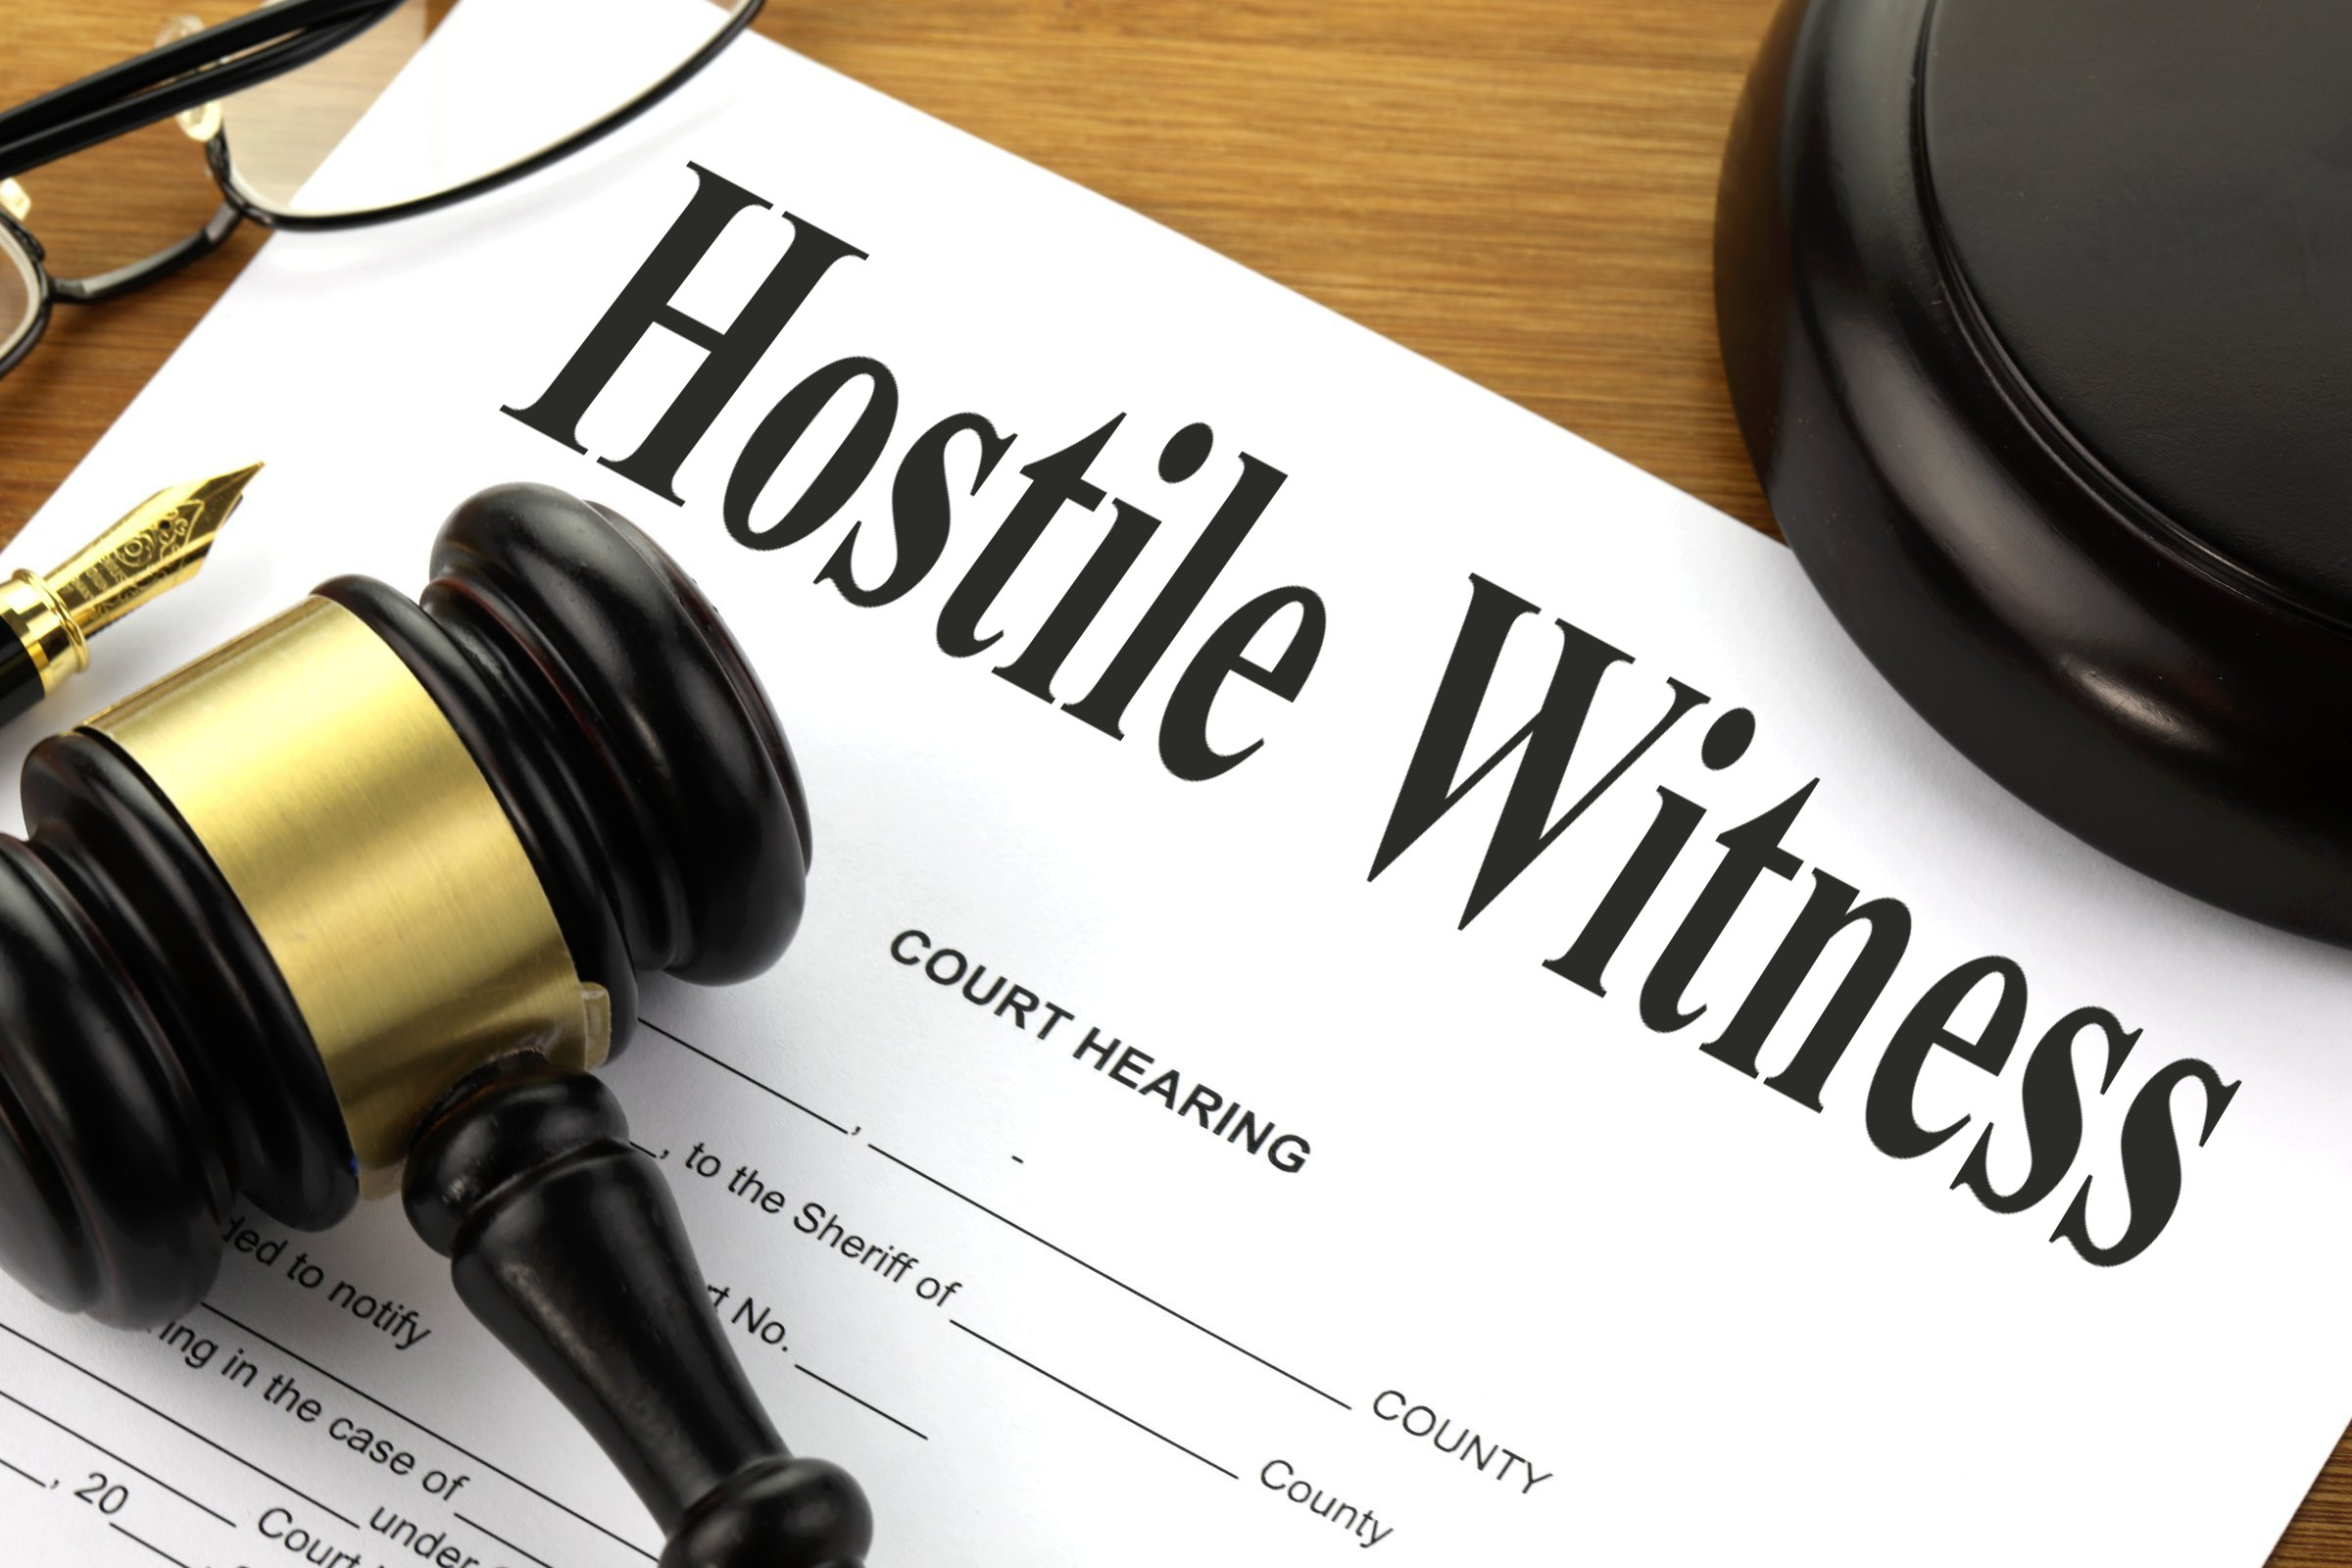 Hostile Witness Free of Charge Creative Commons Legal 1 image